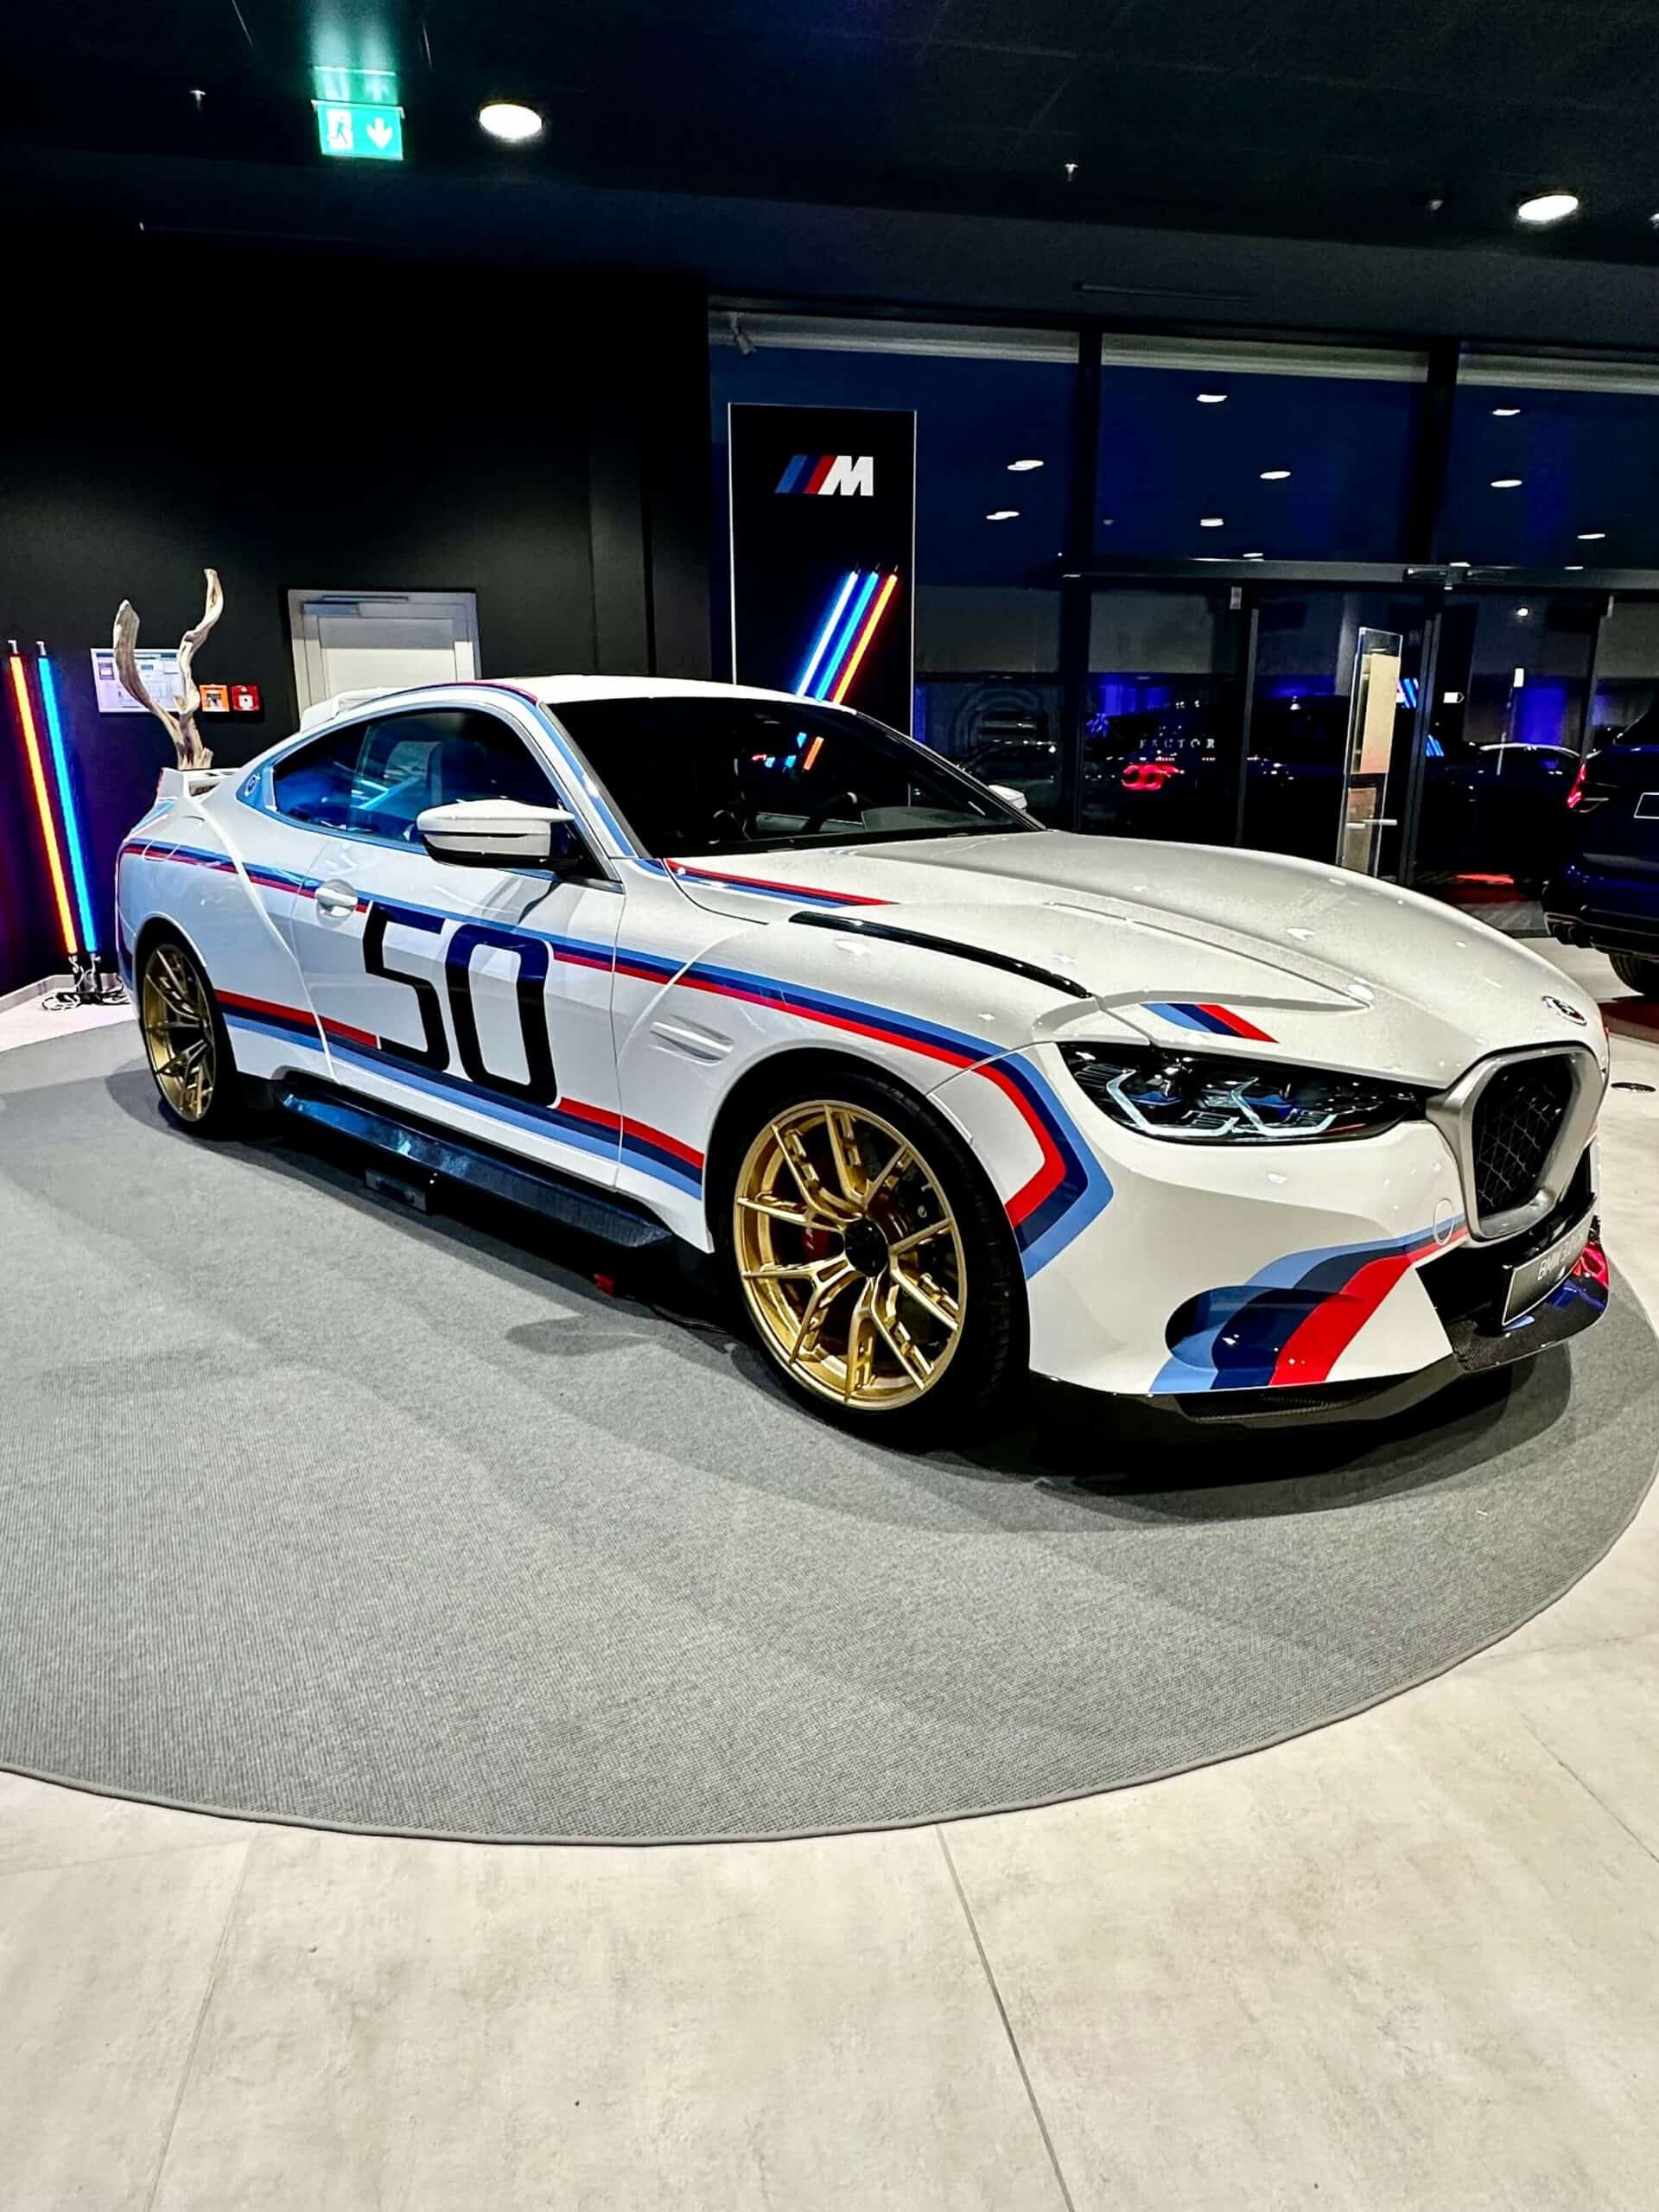 BMW 3.0 CSL at 2023 Brussels Motor Show 14 scaled